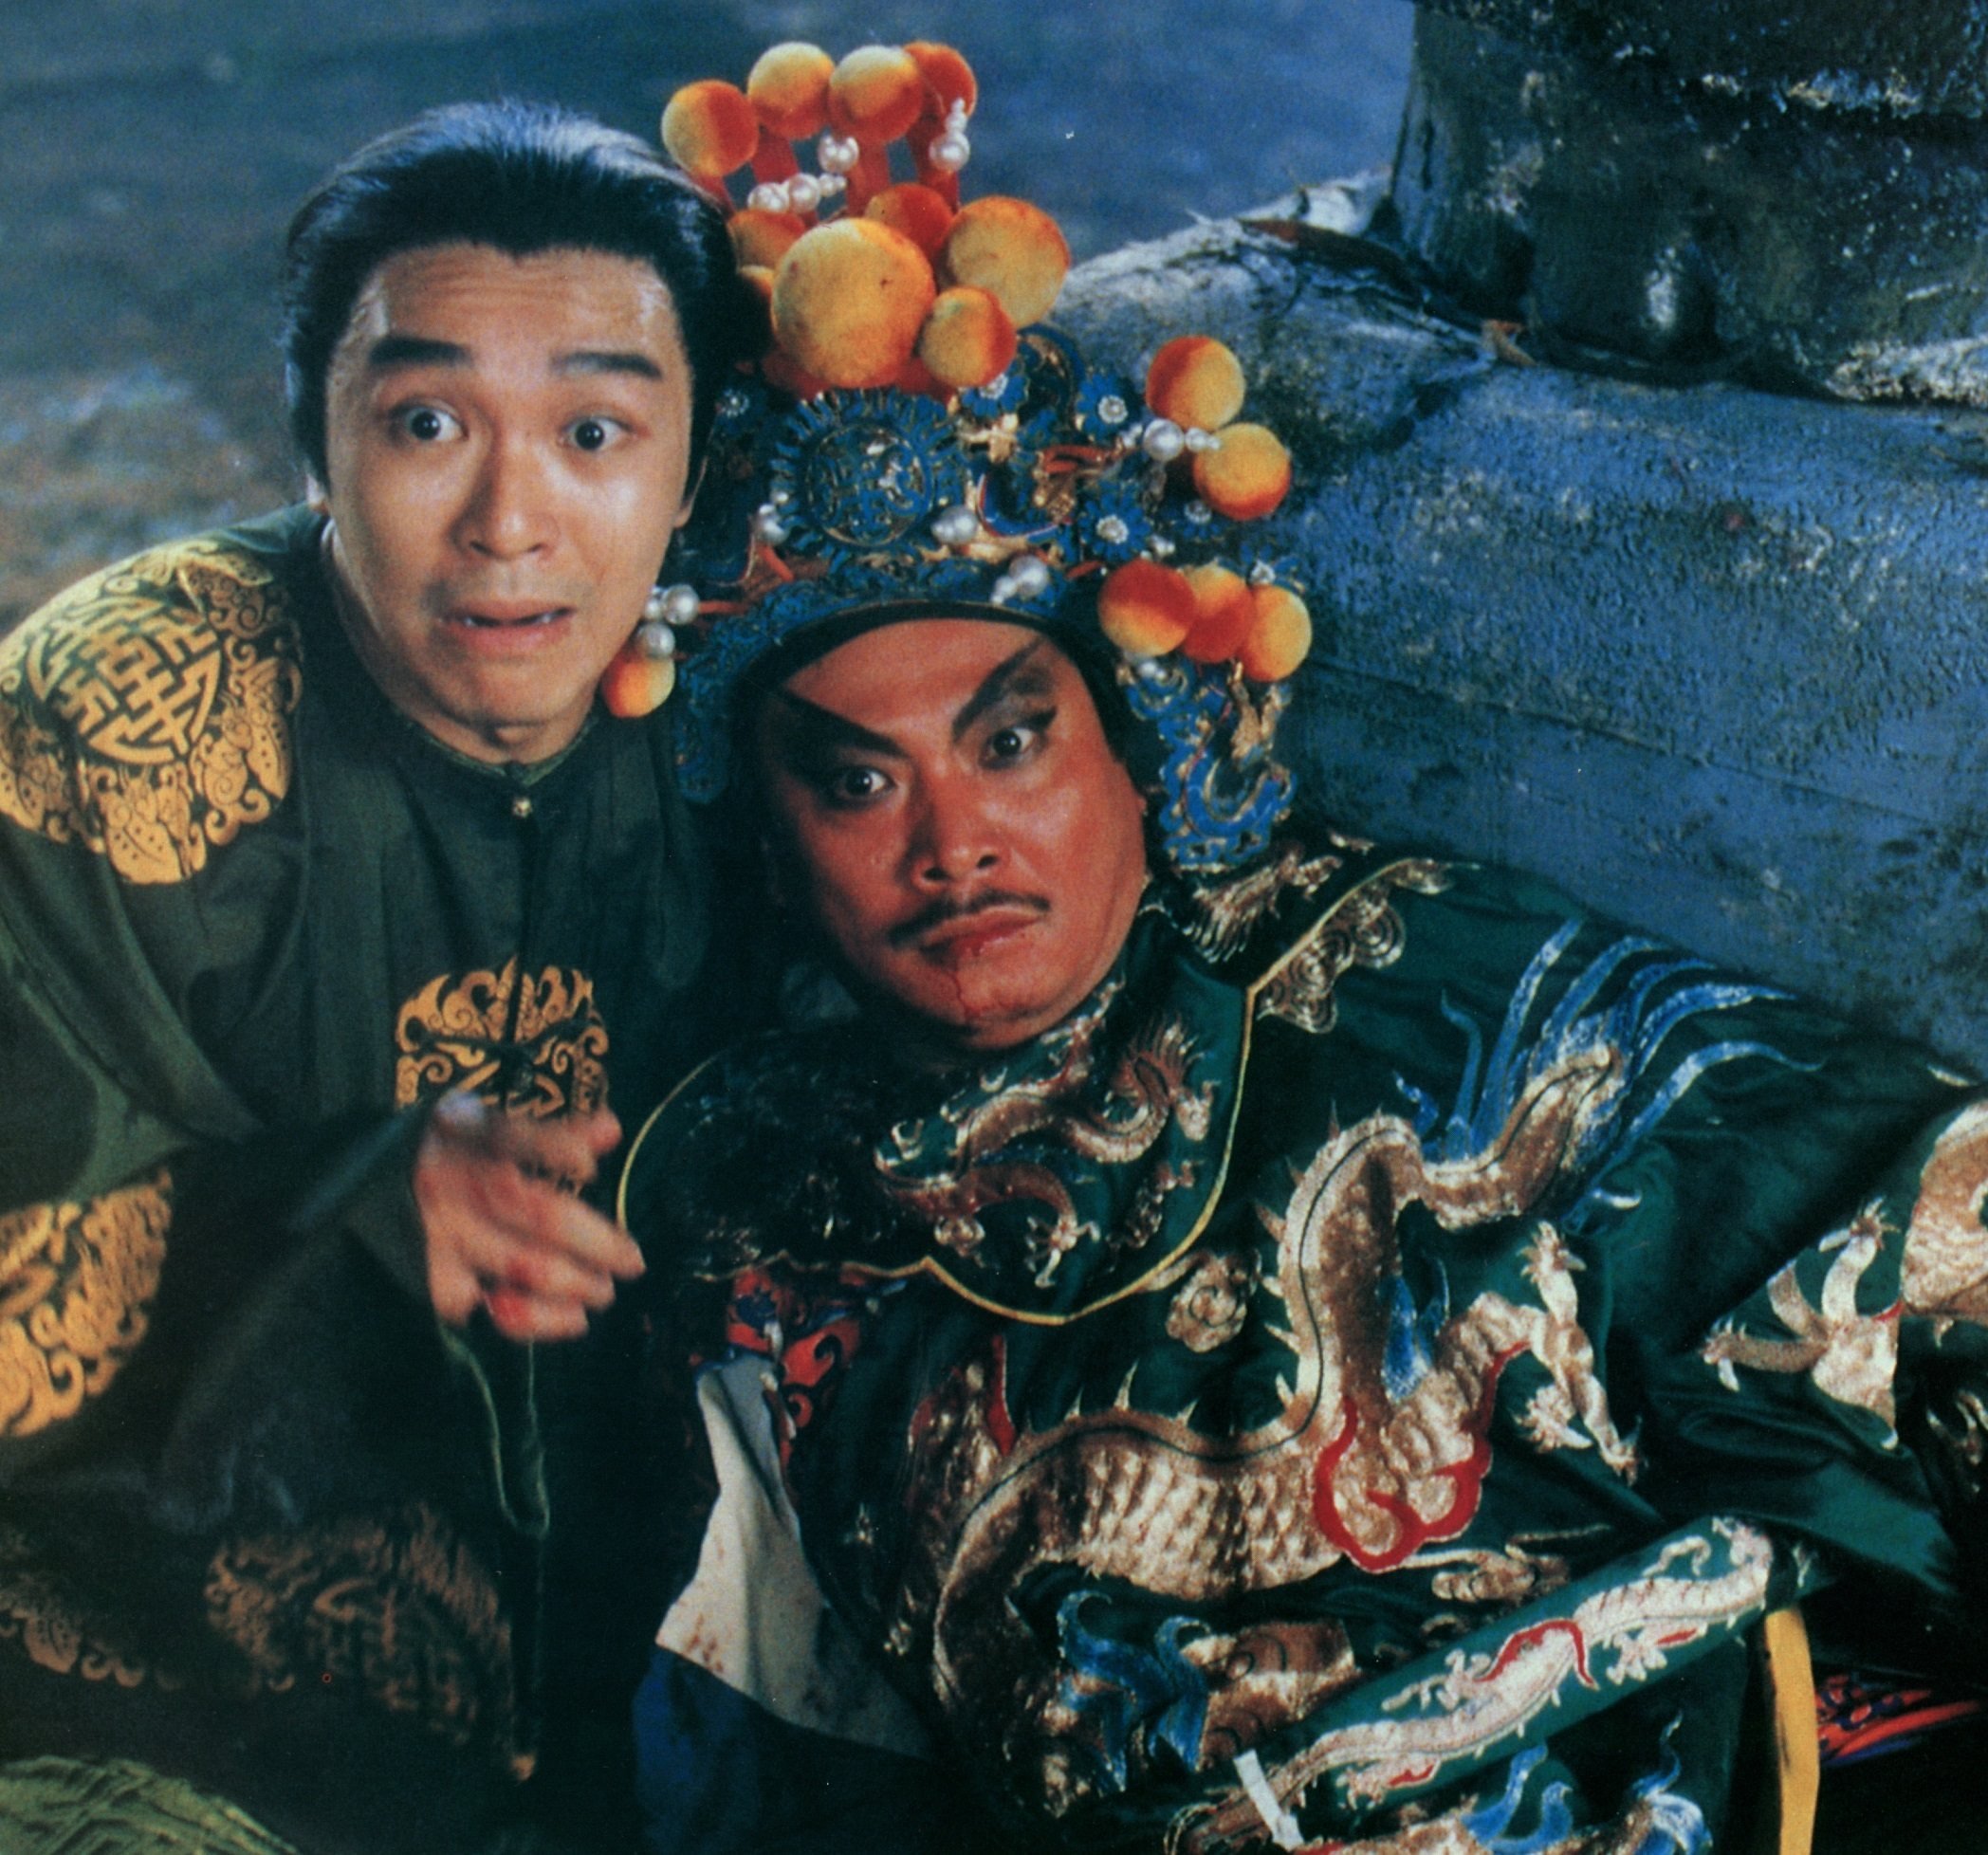 Stephen Chow Sing-chi (left) and Ng Man-tat in a still from Royal Tramp.